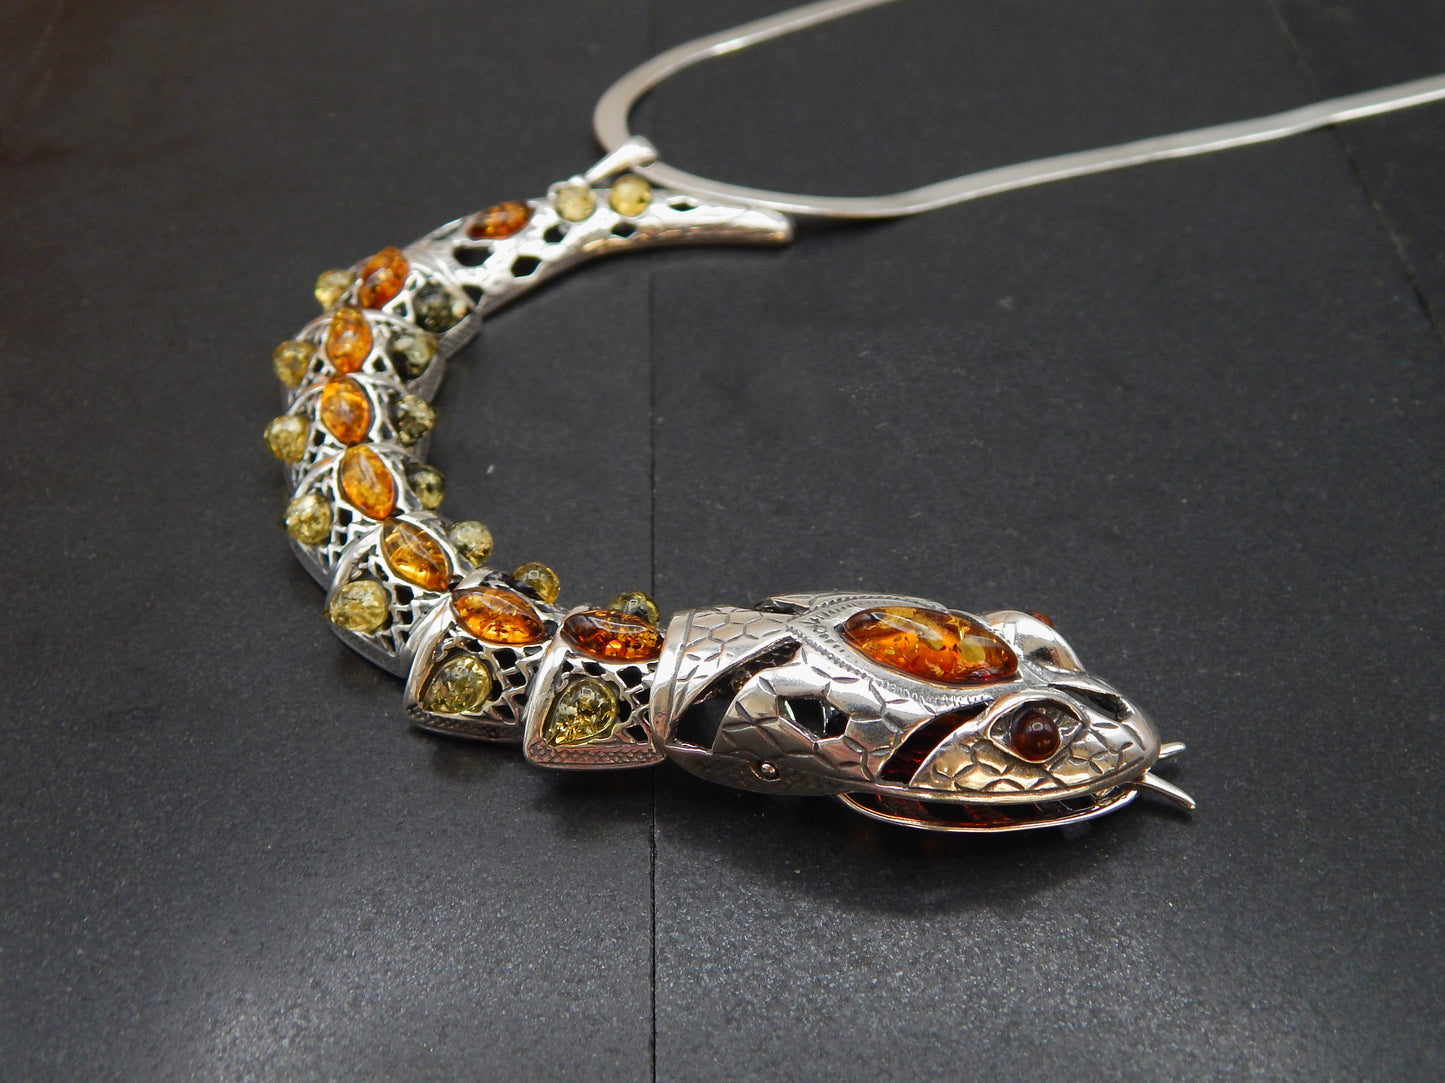 Natural Baltic Amber Rattlesnake Statement Necklace in 925 Sterling Silver